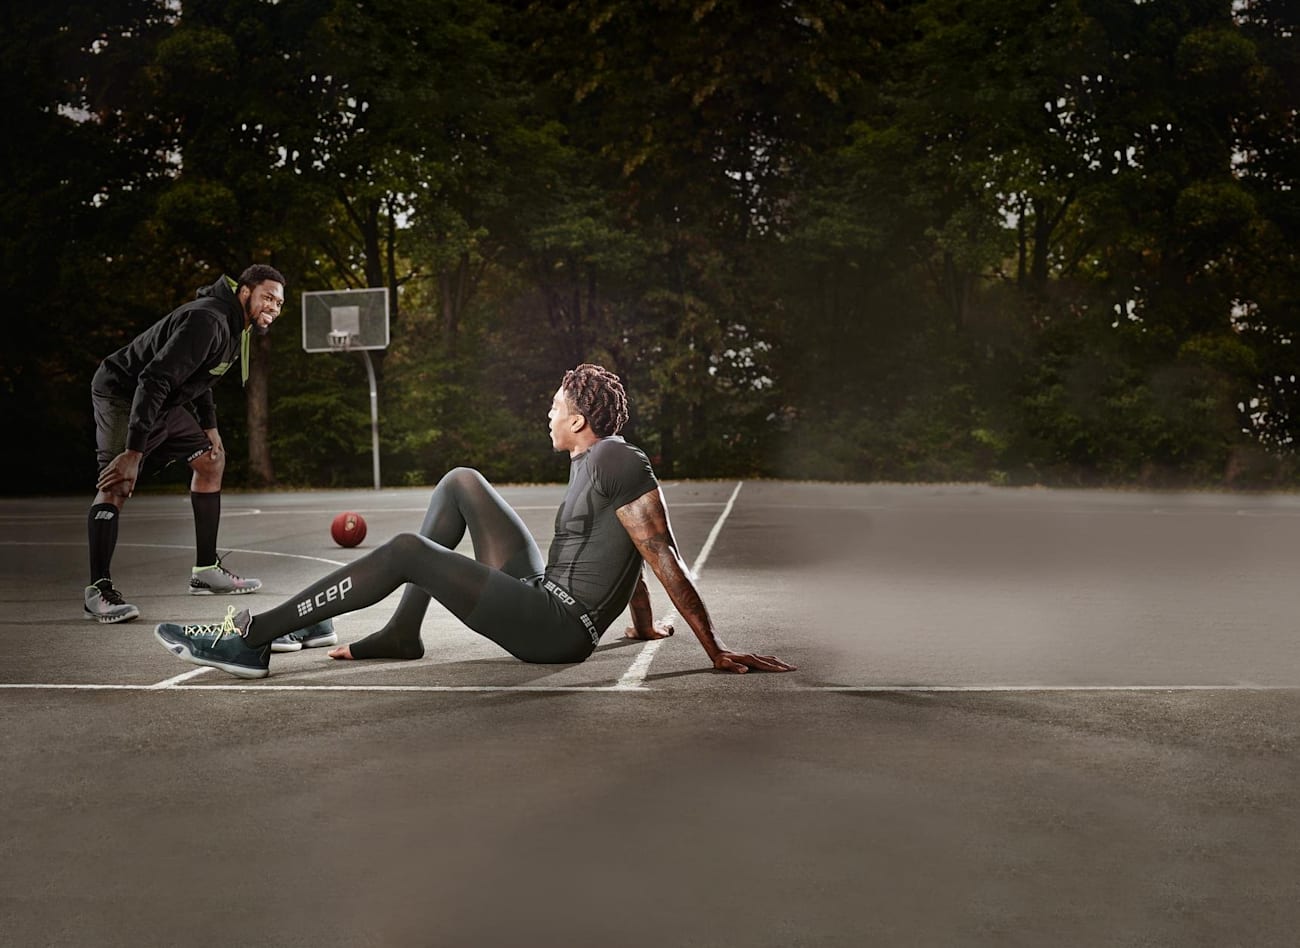 Two people play basketball wearing compression wear.